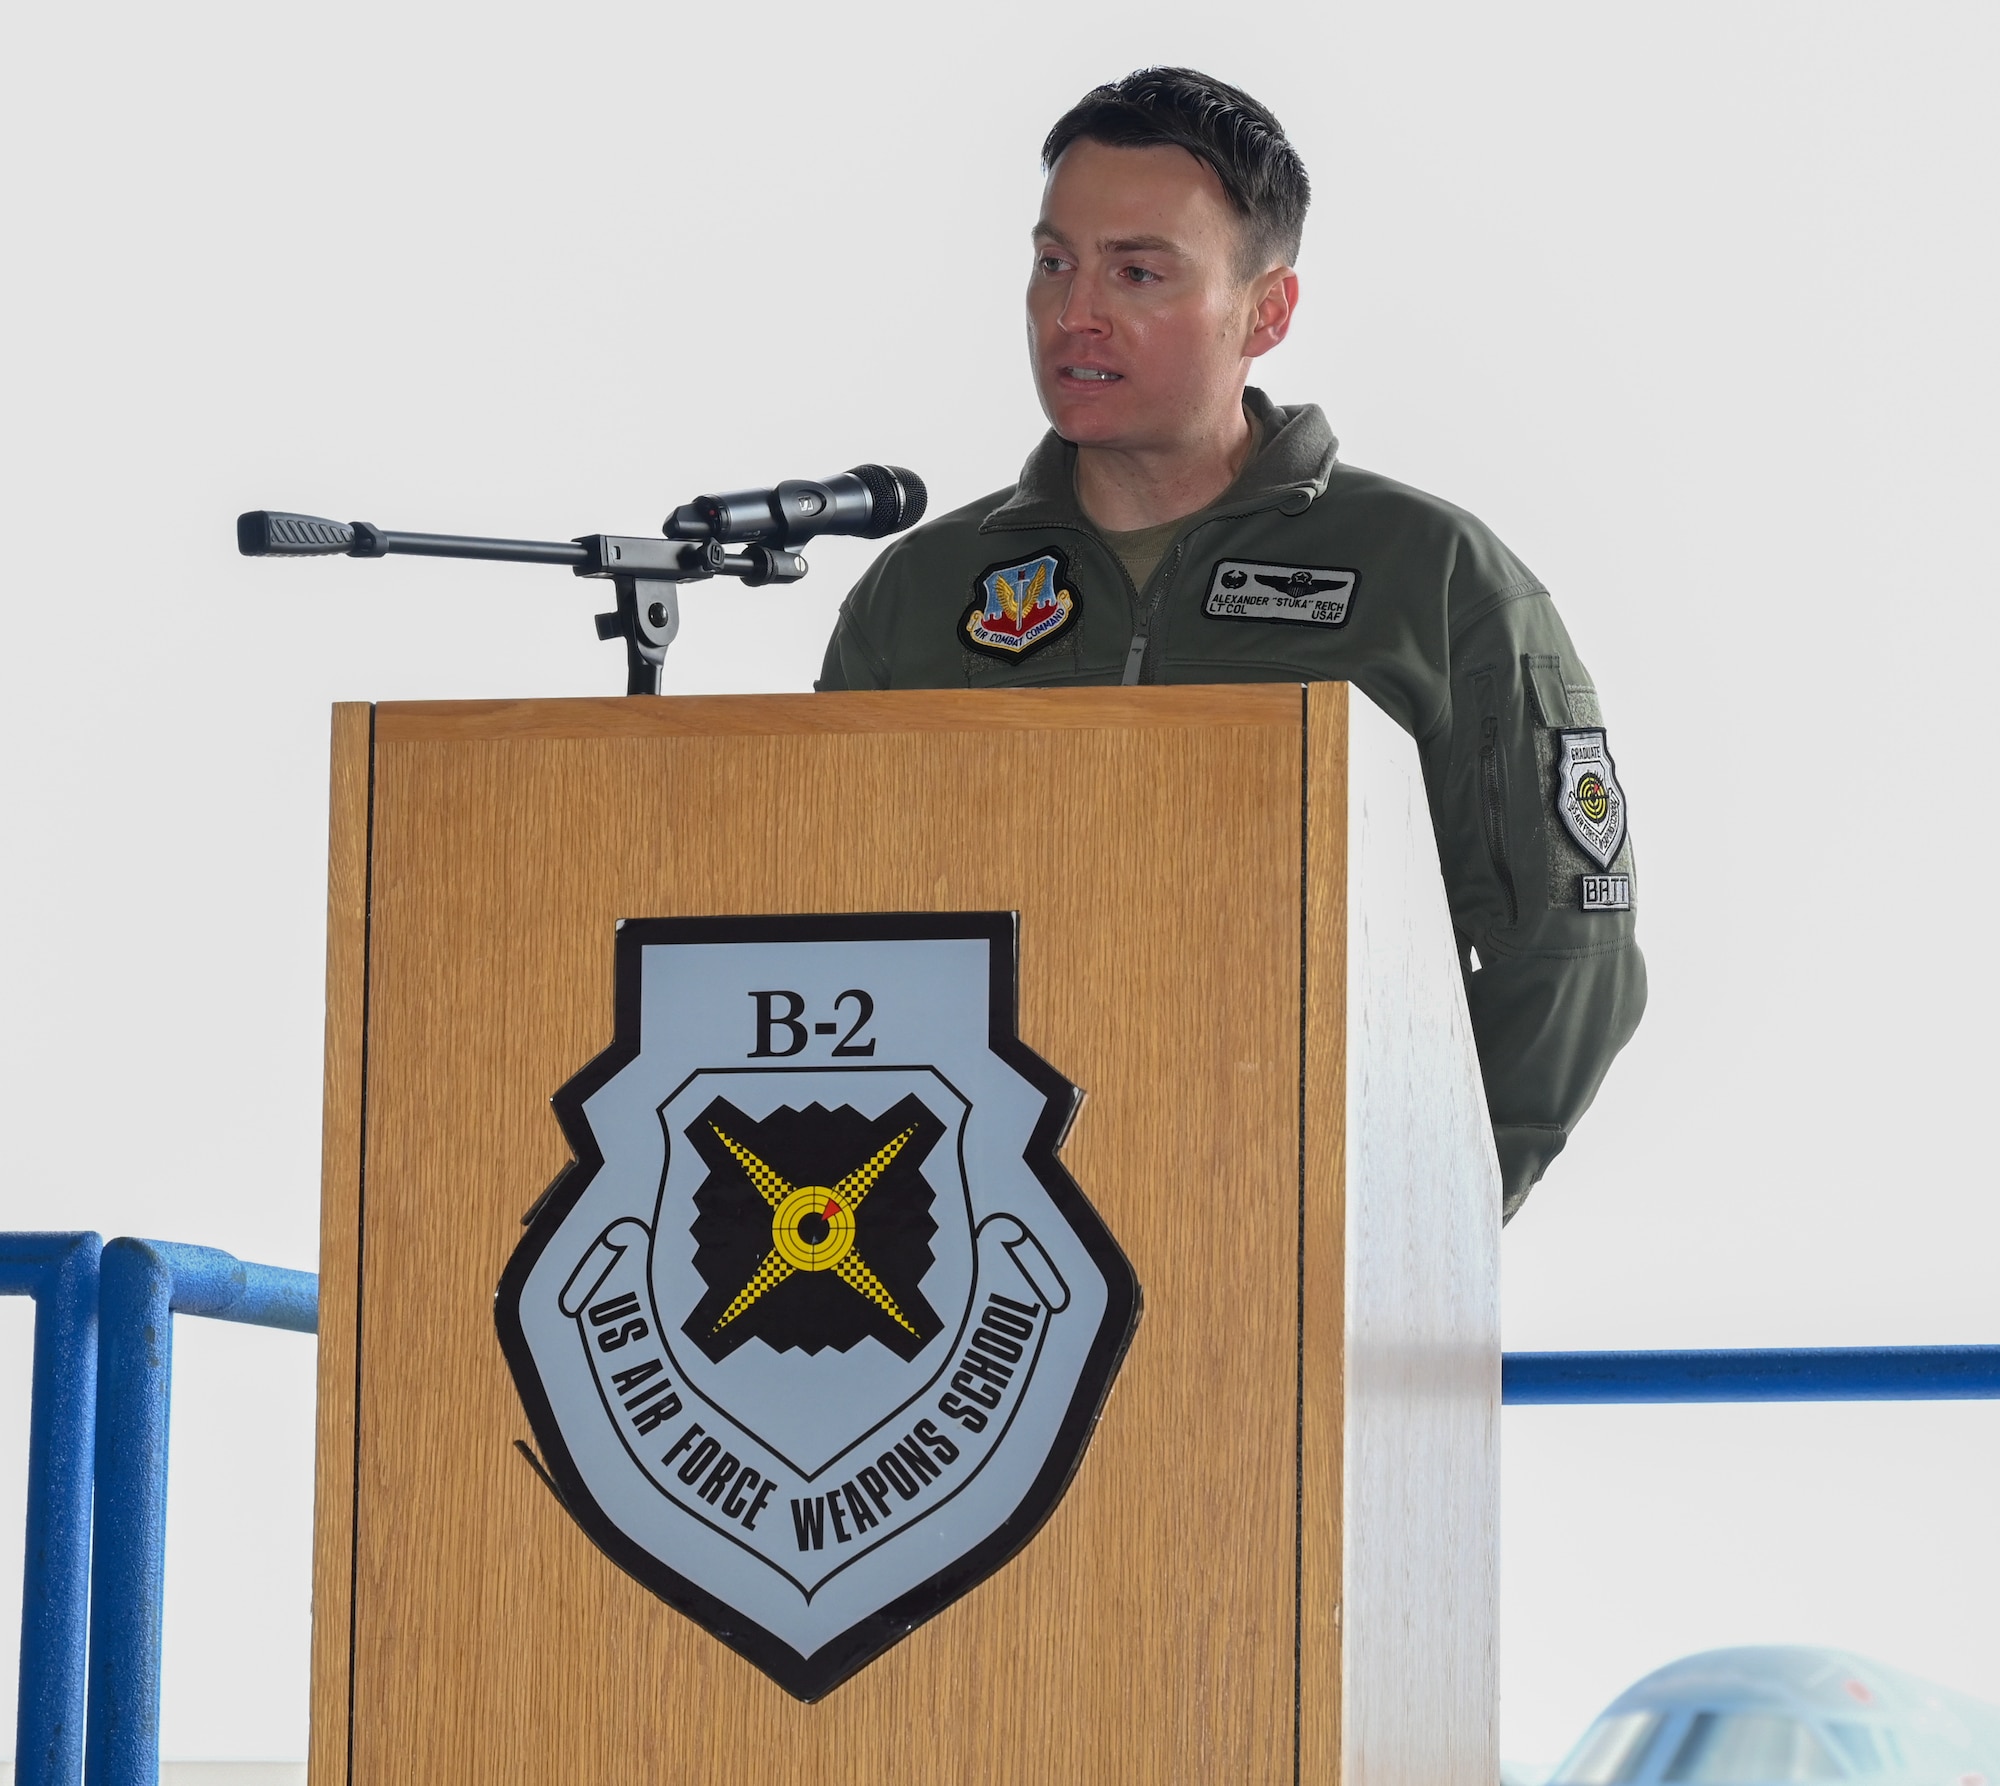 Lt. Col. Alexander Reich, 325th Weapons Squadron, 57th Wing, speaks during a change of command at Whiteman Air Force Base, Missouri, December 14, 2022. Change of commands are a tradition dating back hundreds of years, with the U.S. Air Force adopting it from the U.S. Army. (U.S. Air Force photo by Airman 1st Class Joseph Garcia)